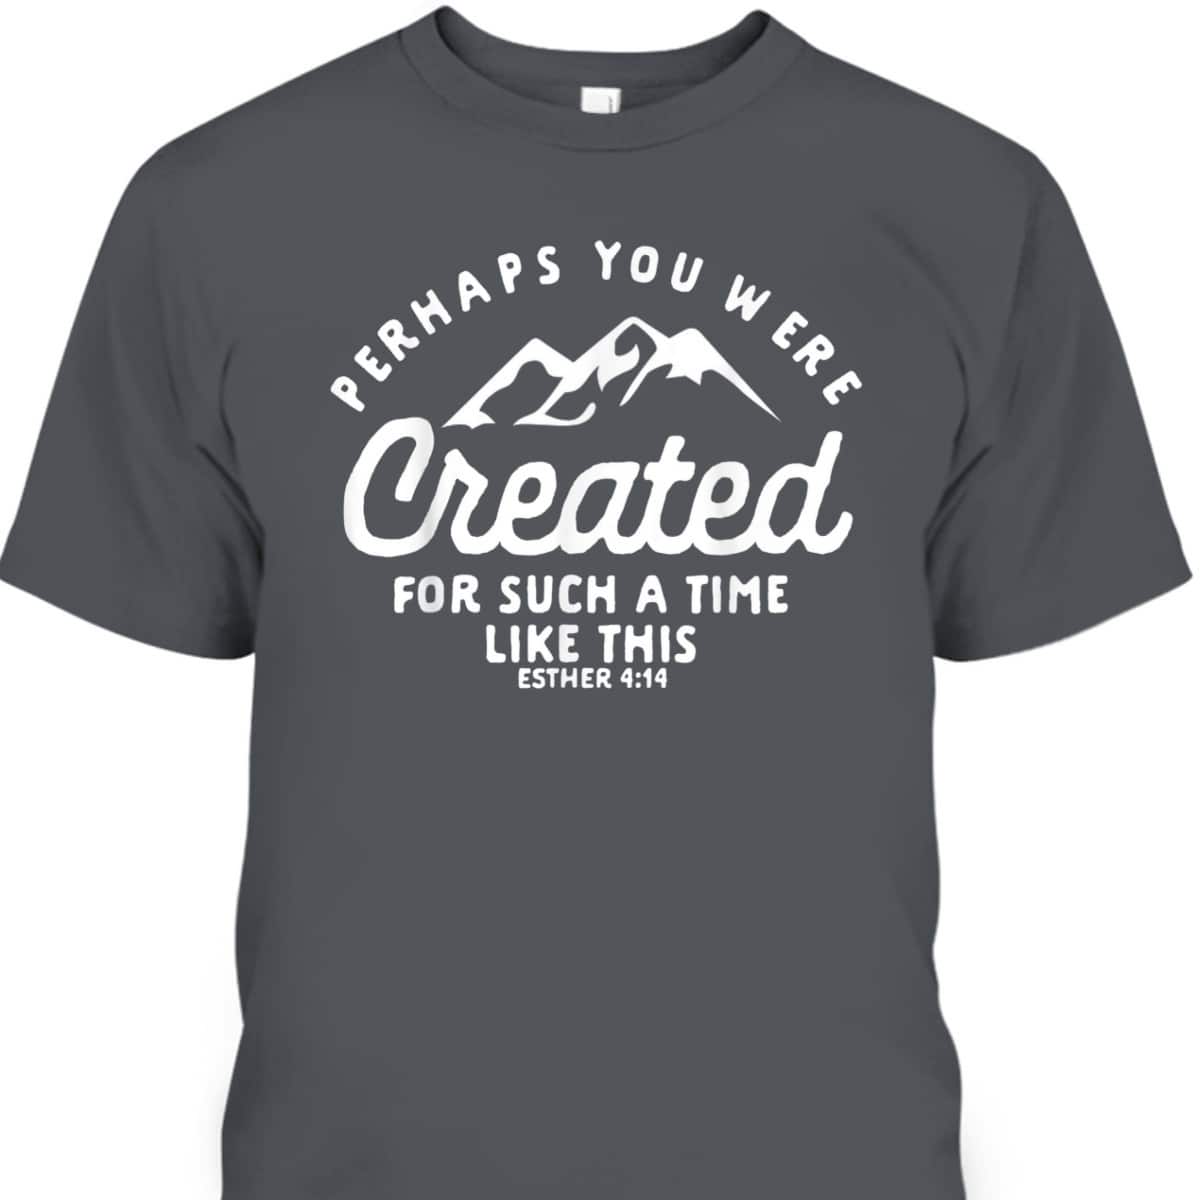 Christian Created For A Time Like This Esther 414 T-Shirt